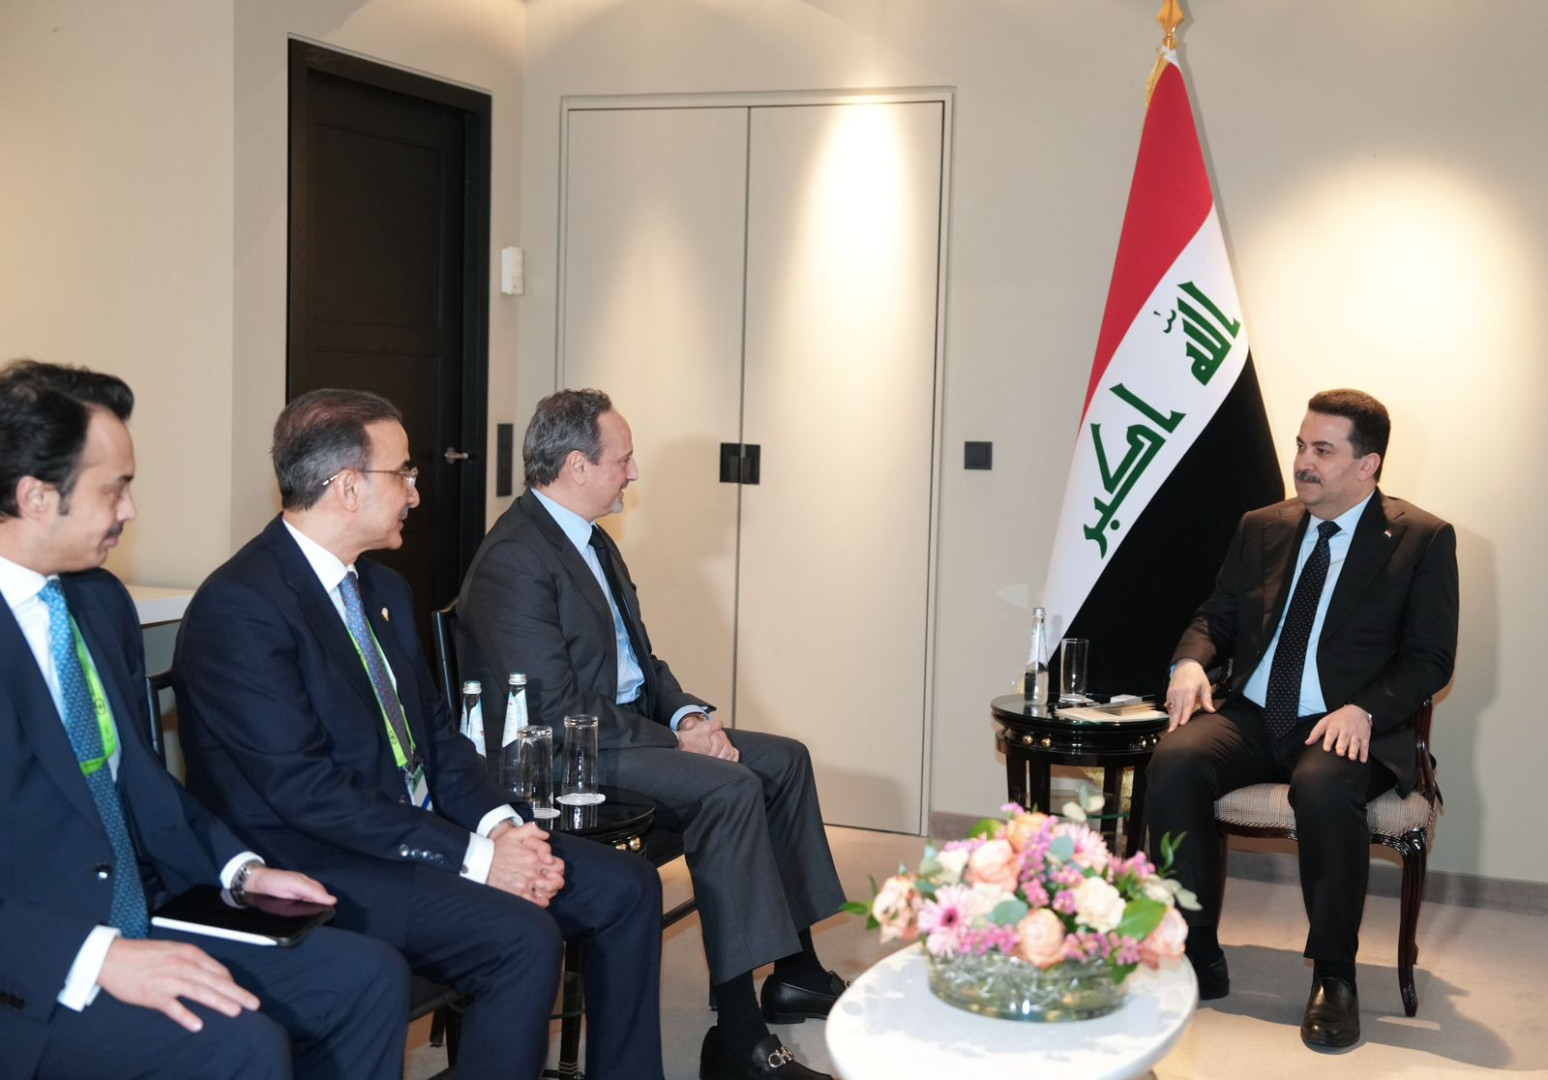 Iraq's PM discusses "fruitful" economic partnerships with Kuwait's foreign minister